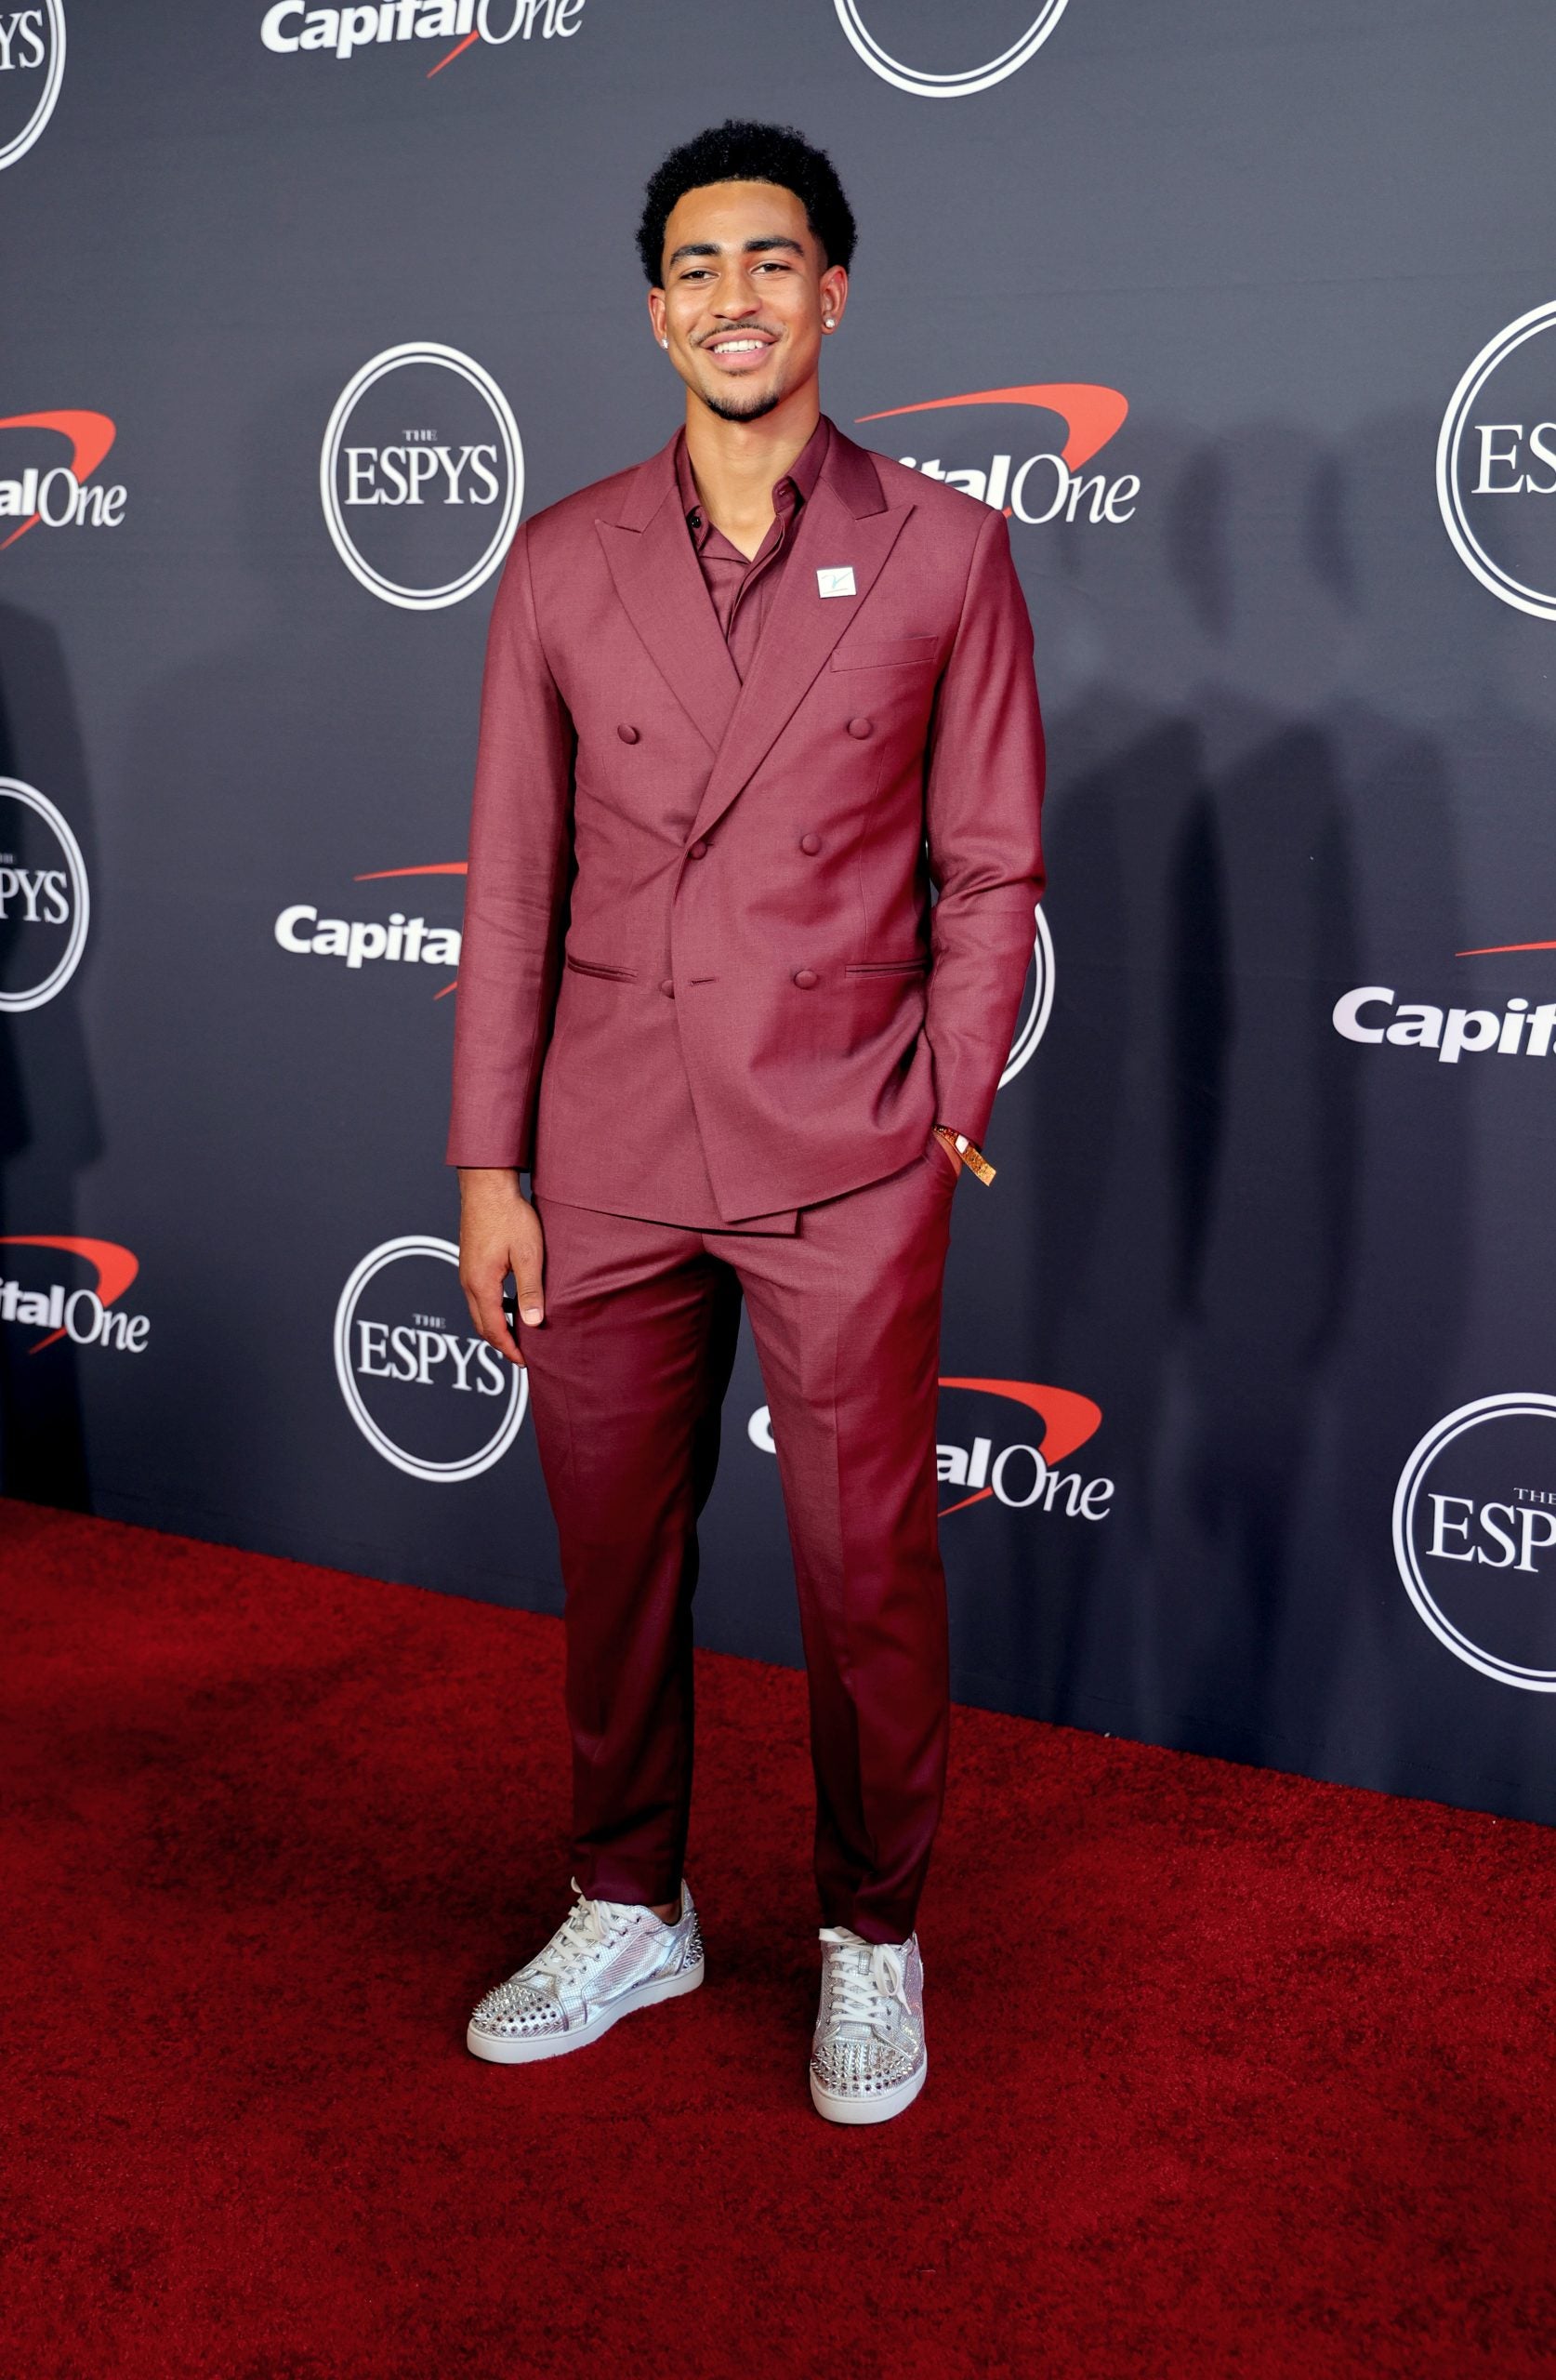 Our Favorite Celebs Brought Out Their Best Looks For The 2022 ESPYs Red Carpet!